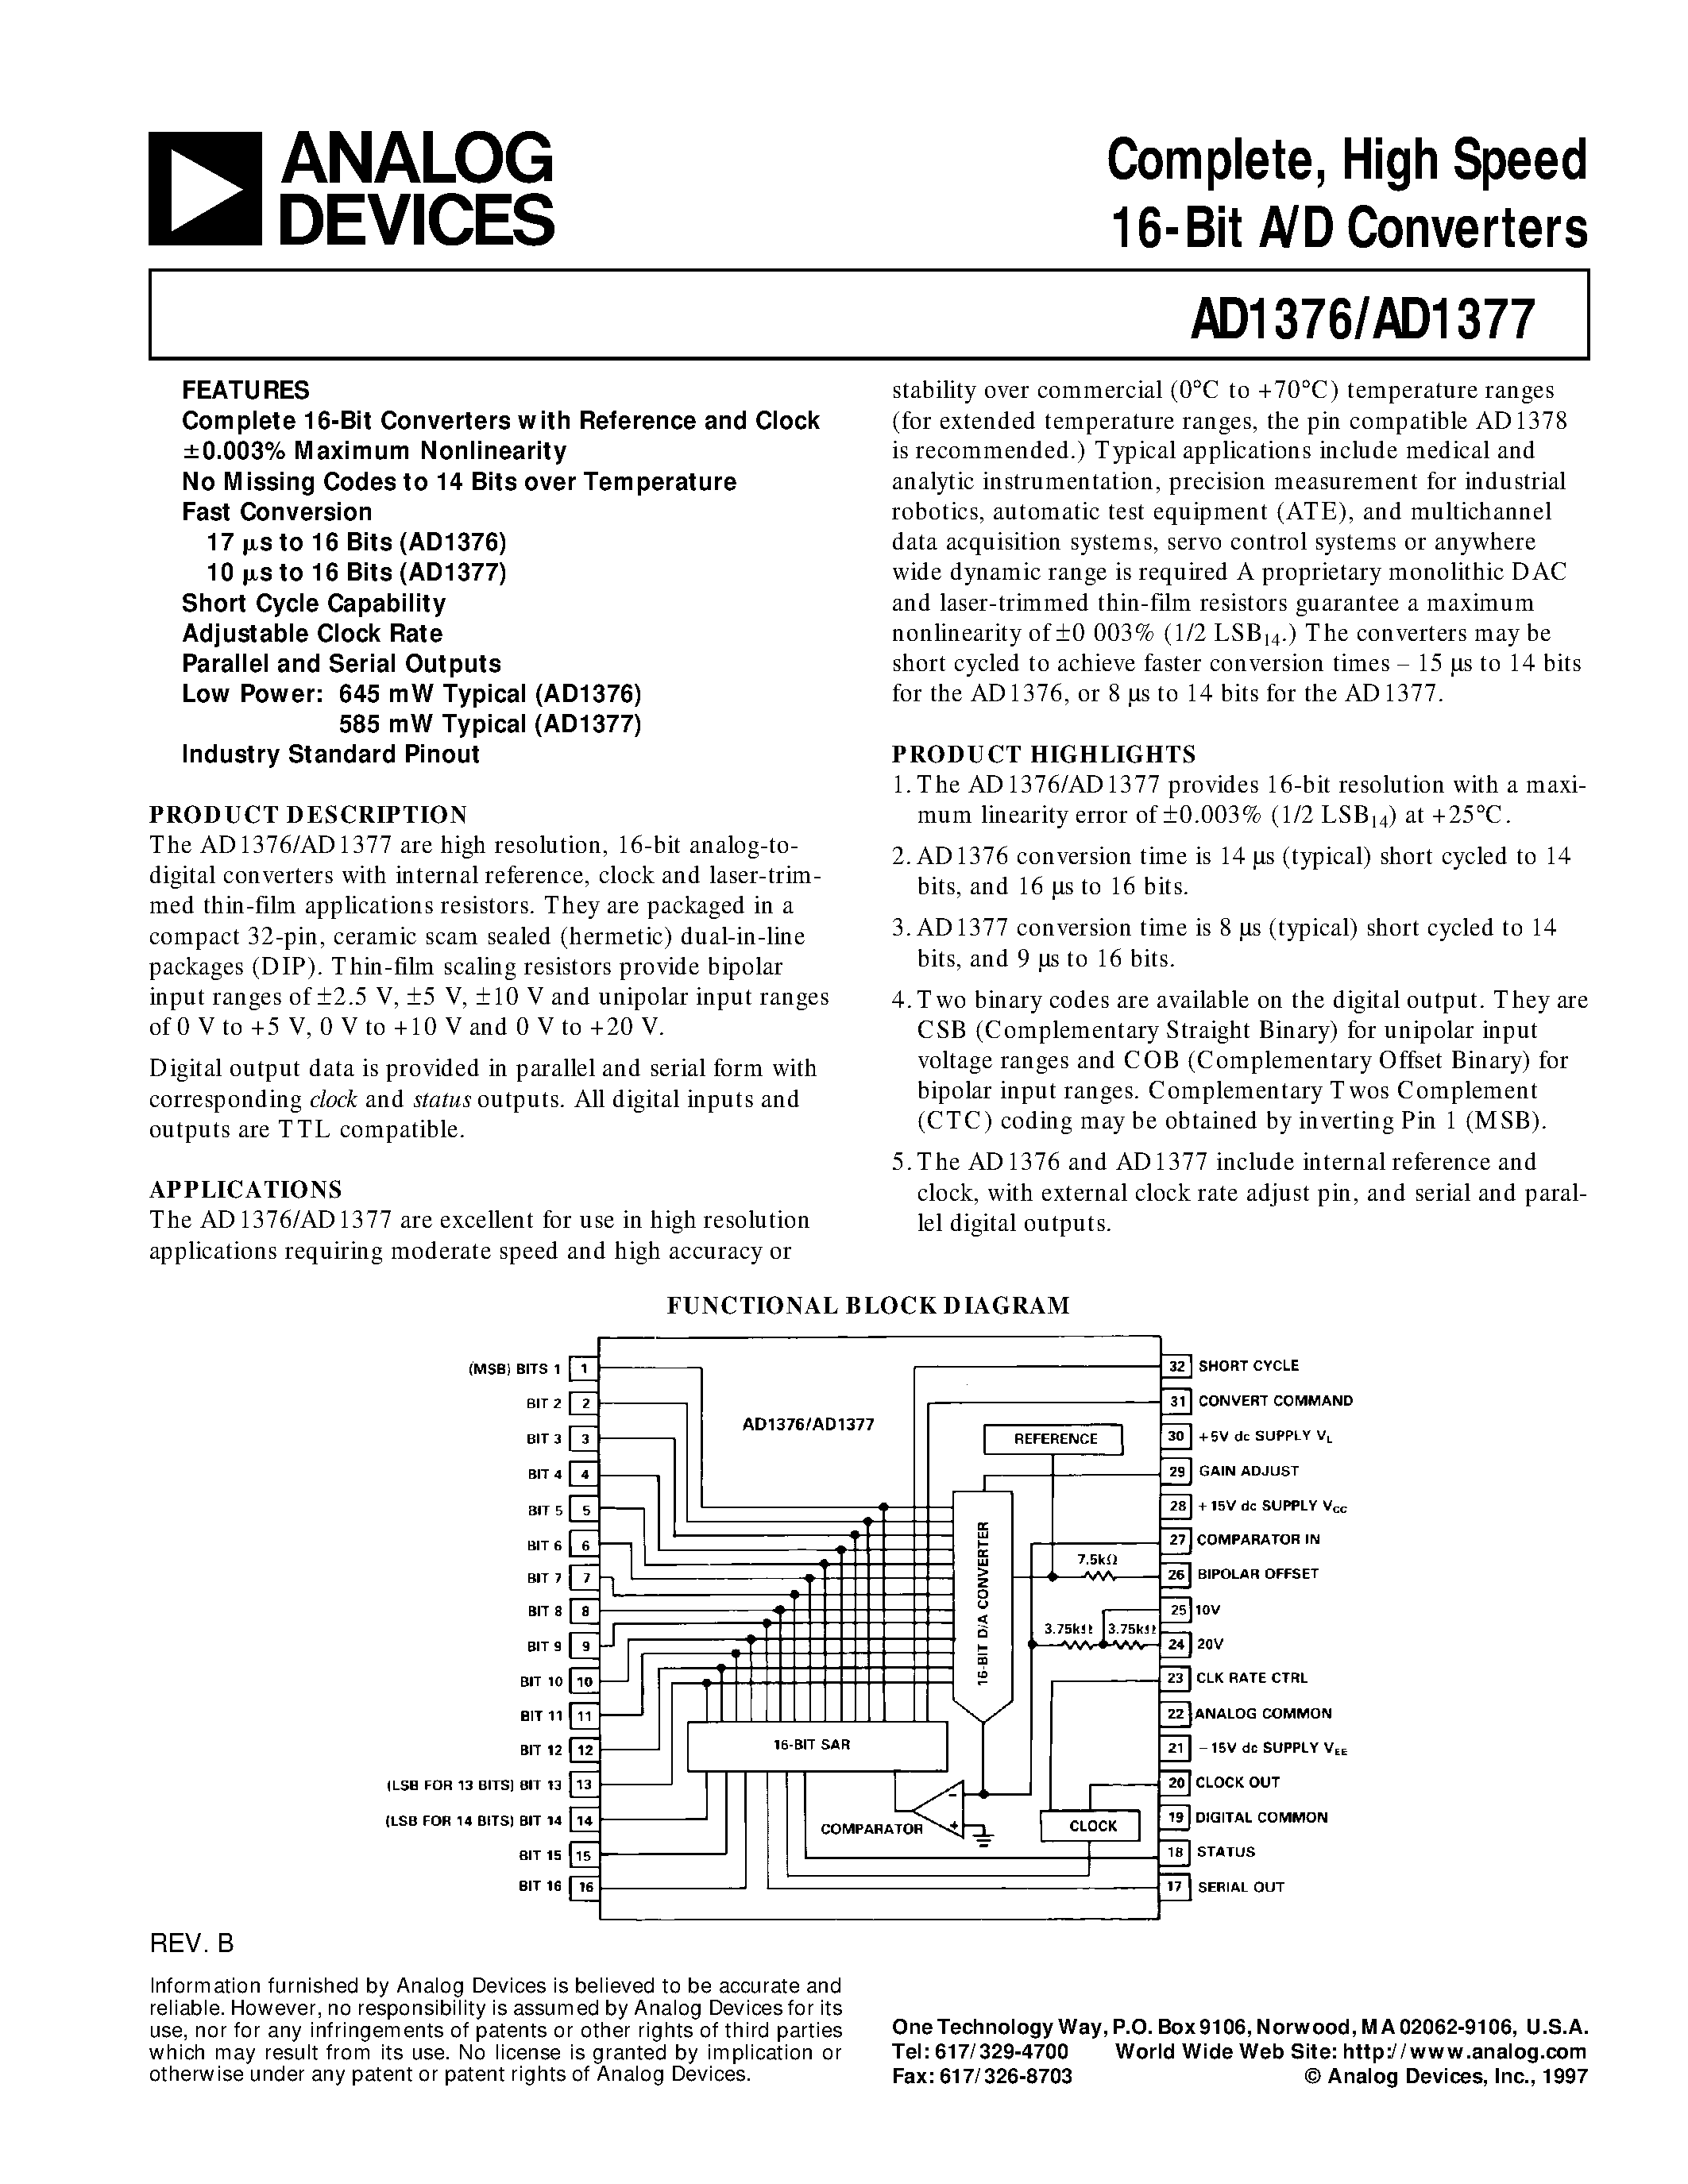 Datasheet AD1377 - Complete/ High Speed 16-Bit A/D Converters page 1